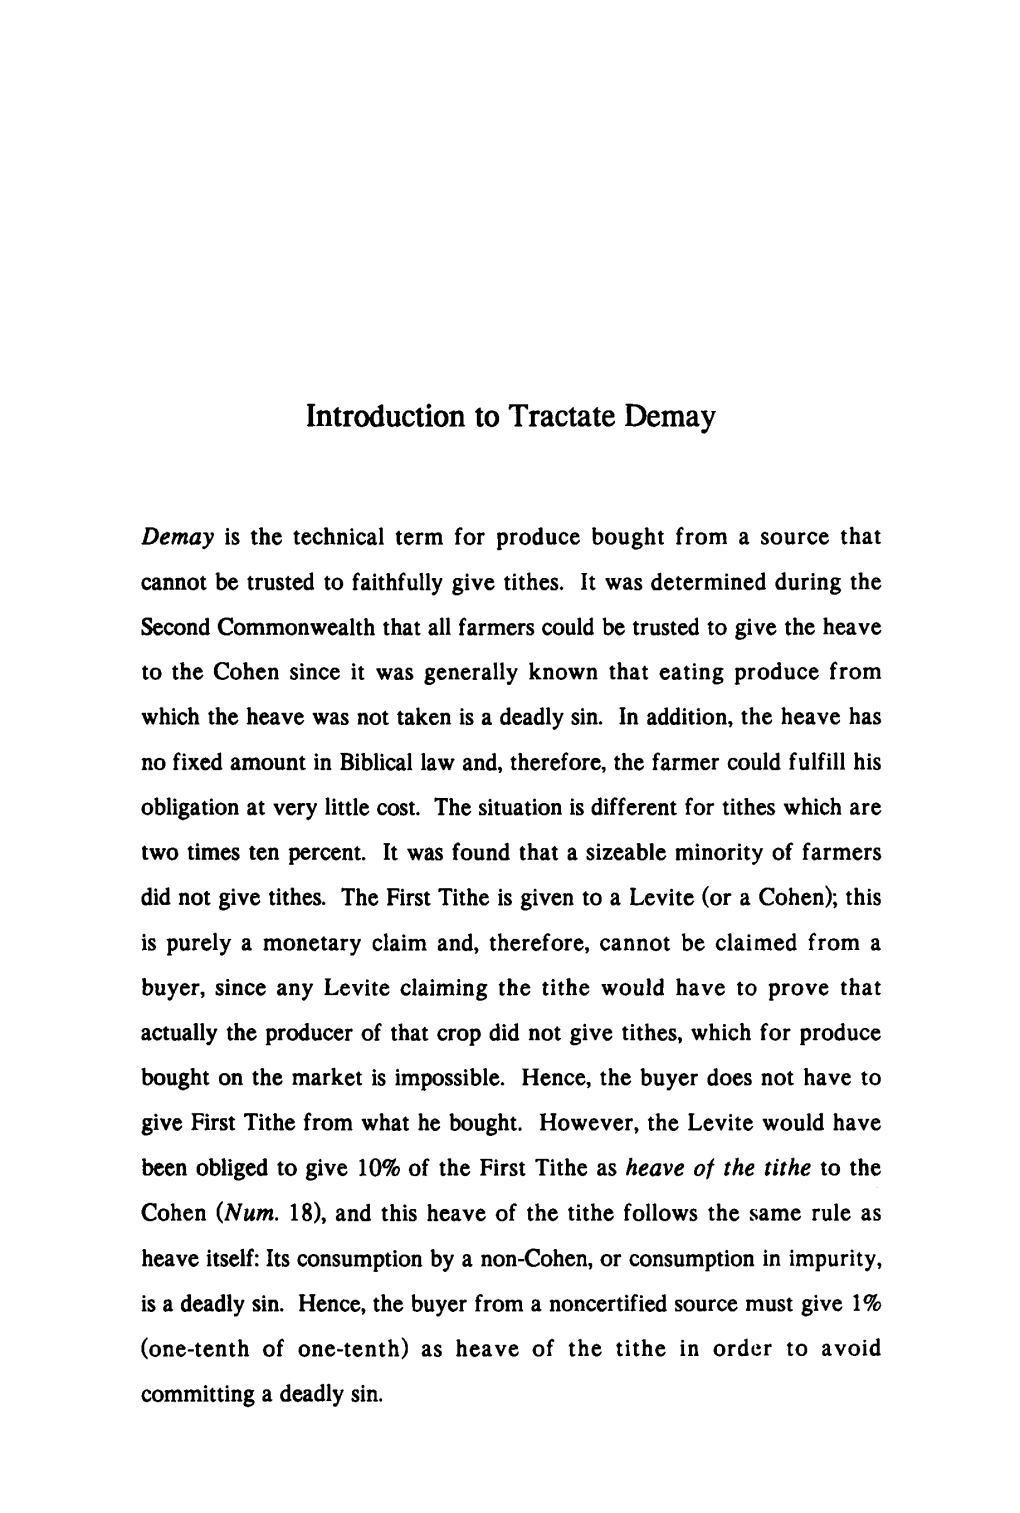 Introduction to Tractate Demay